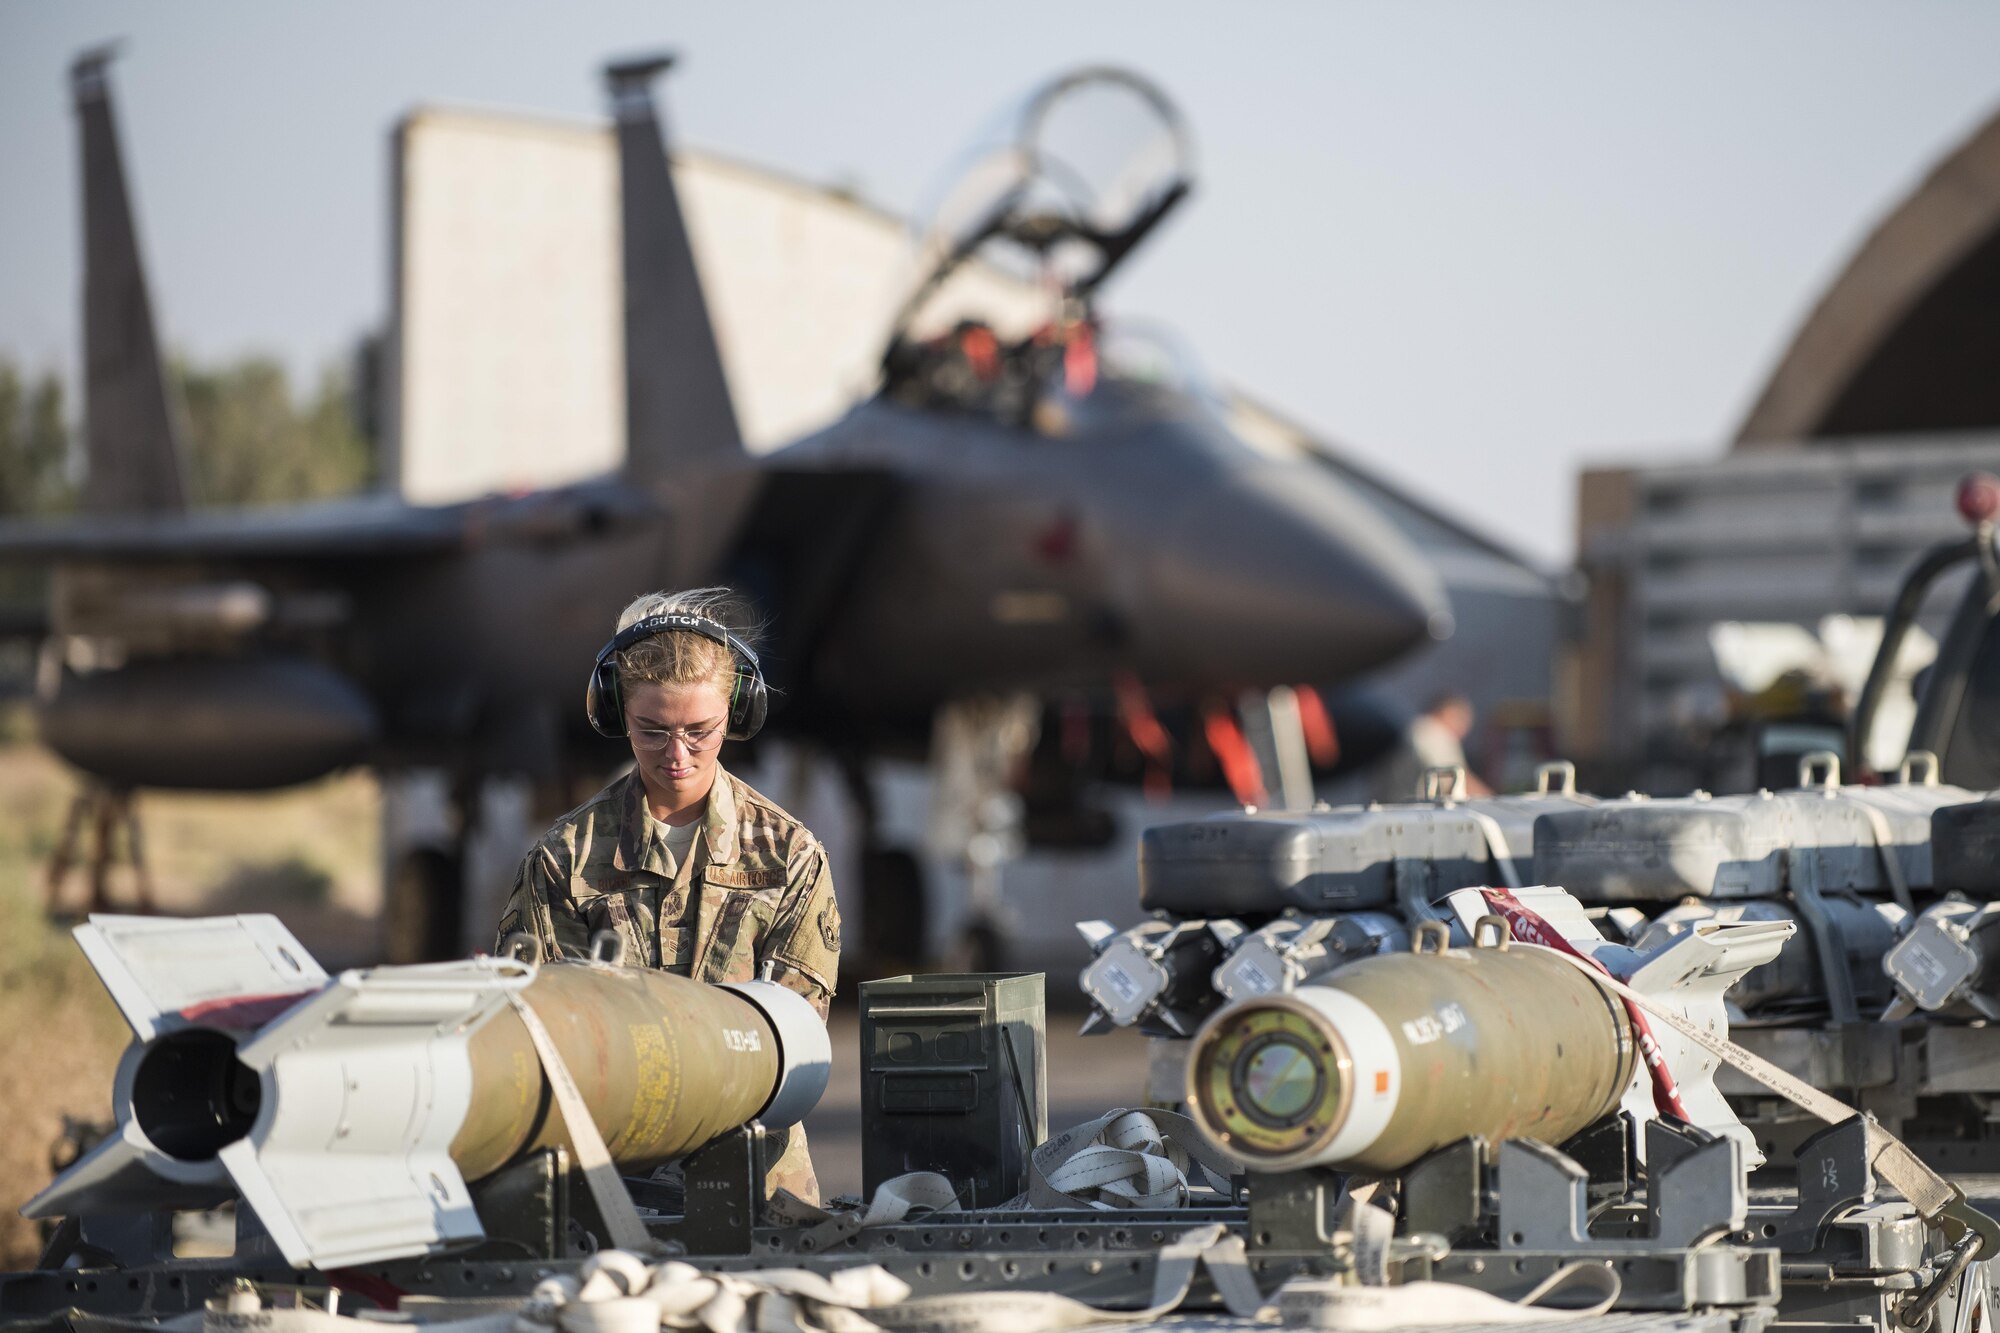 Senior Airman Amanda Butch, 332nd Expeditionary Maintenance Squadron line delivery technician, accounts for munition that was loaded on a trailer August 13, 2017, in Southwest Asia. The 332nd EMXS is charged with safely loading and offloading munitions on to F-15E Strike Eagles in support of Operation Inherent Resolve. (U.S. Air Force photo/Senior Airman Damon Kasberg)